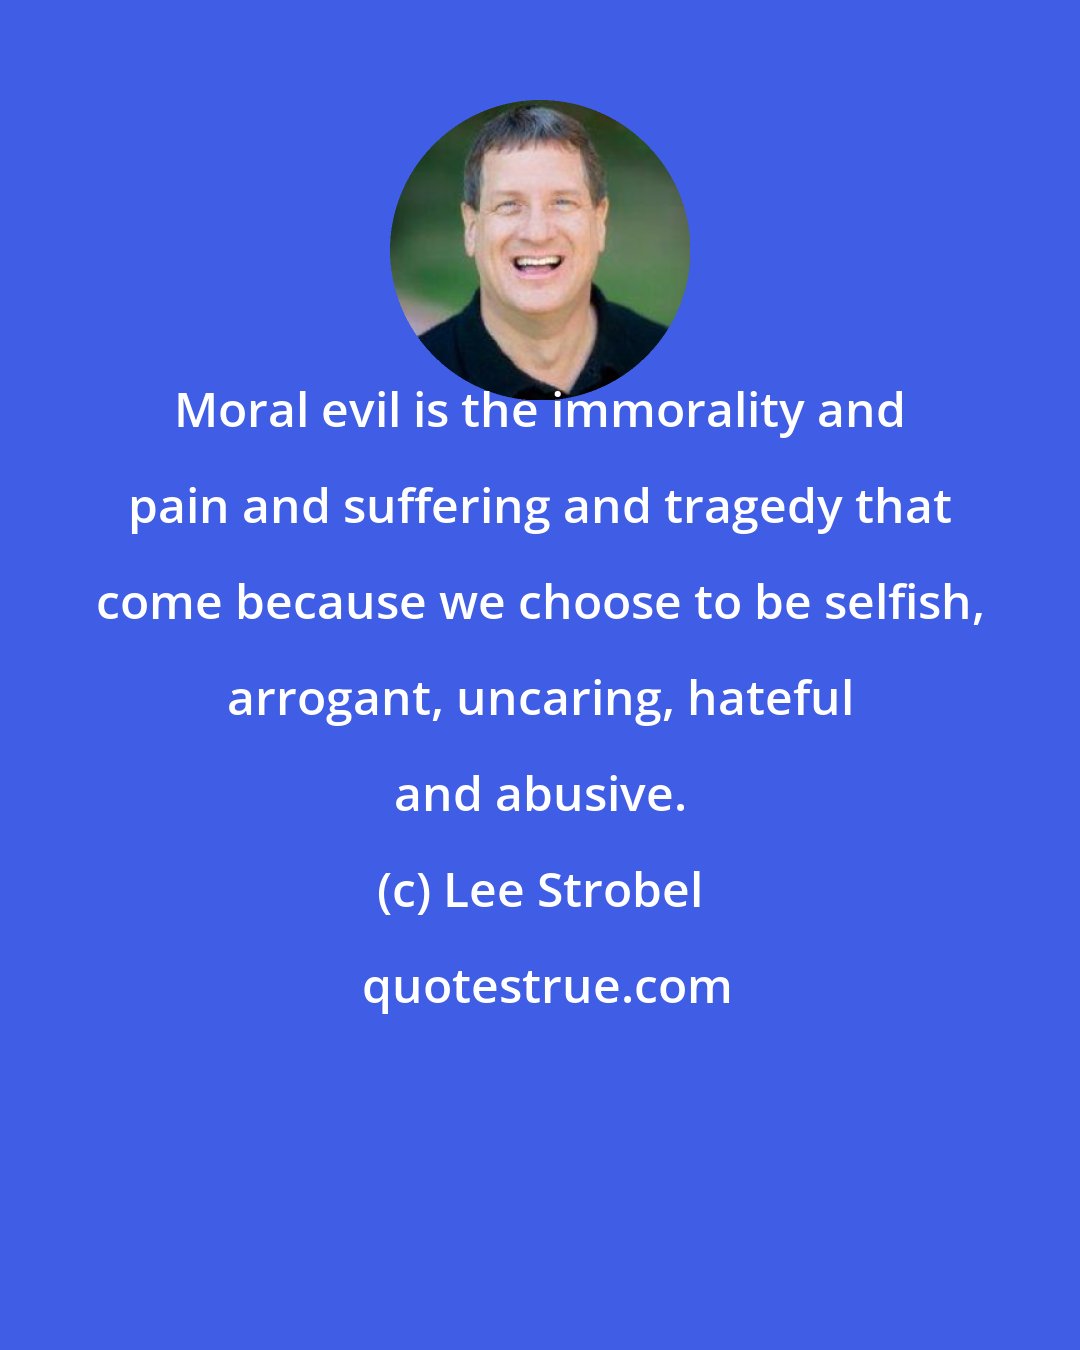 Lee Strobel: Moral evil is the immorality and pain and suffering and tragedy that come because we choose to be selfish, arrogant, uncaring, hateful and abusive.